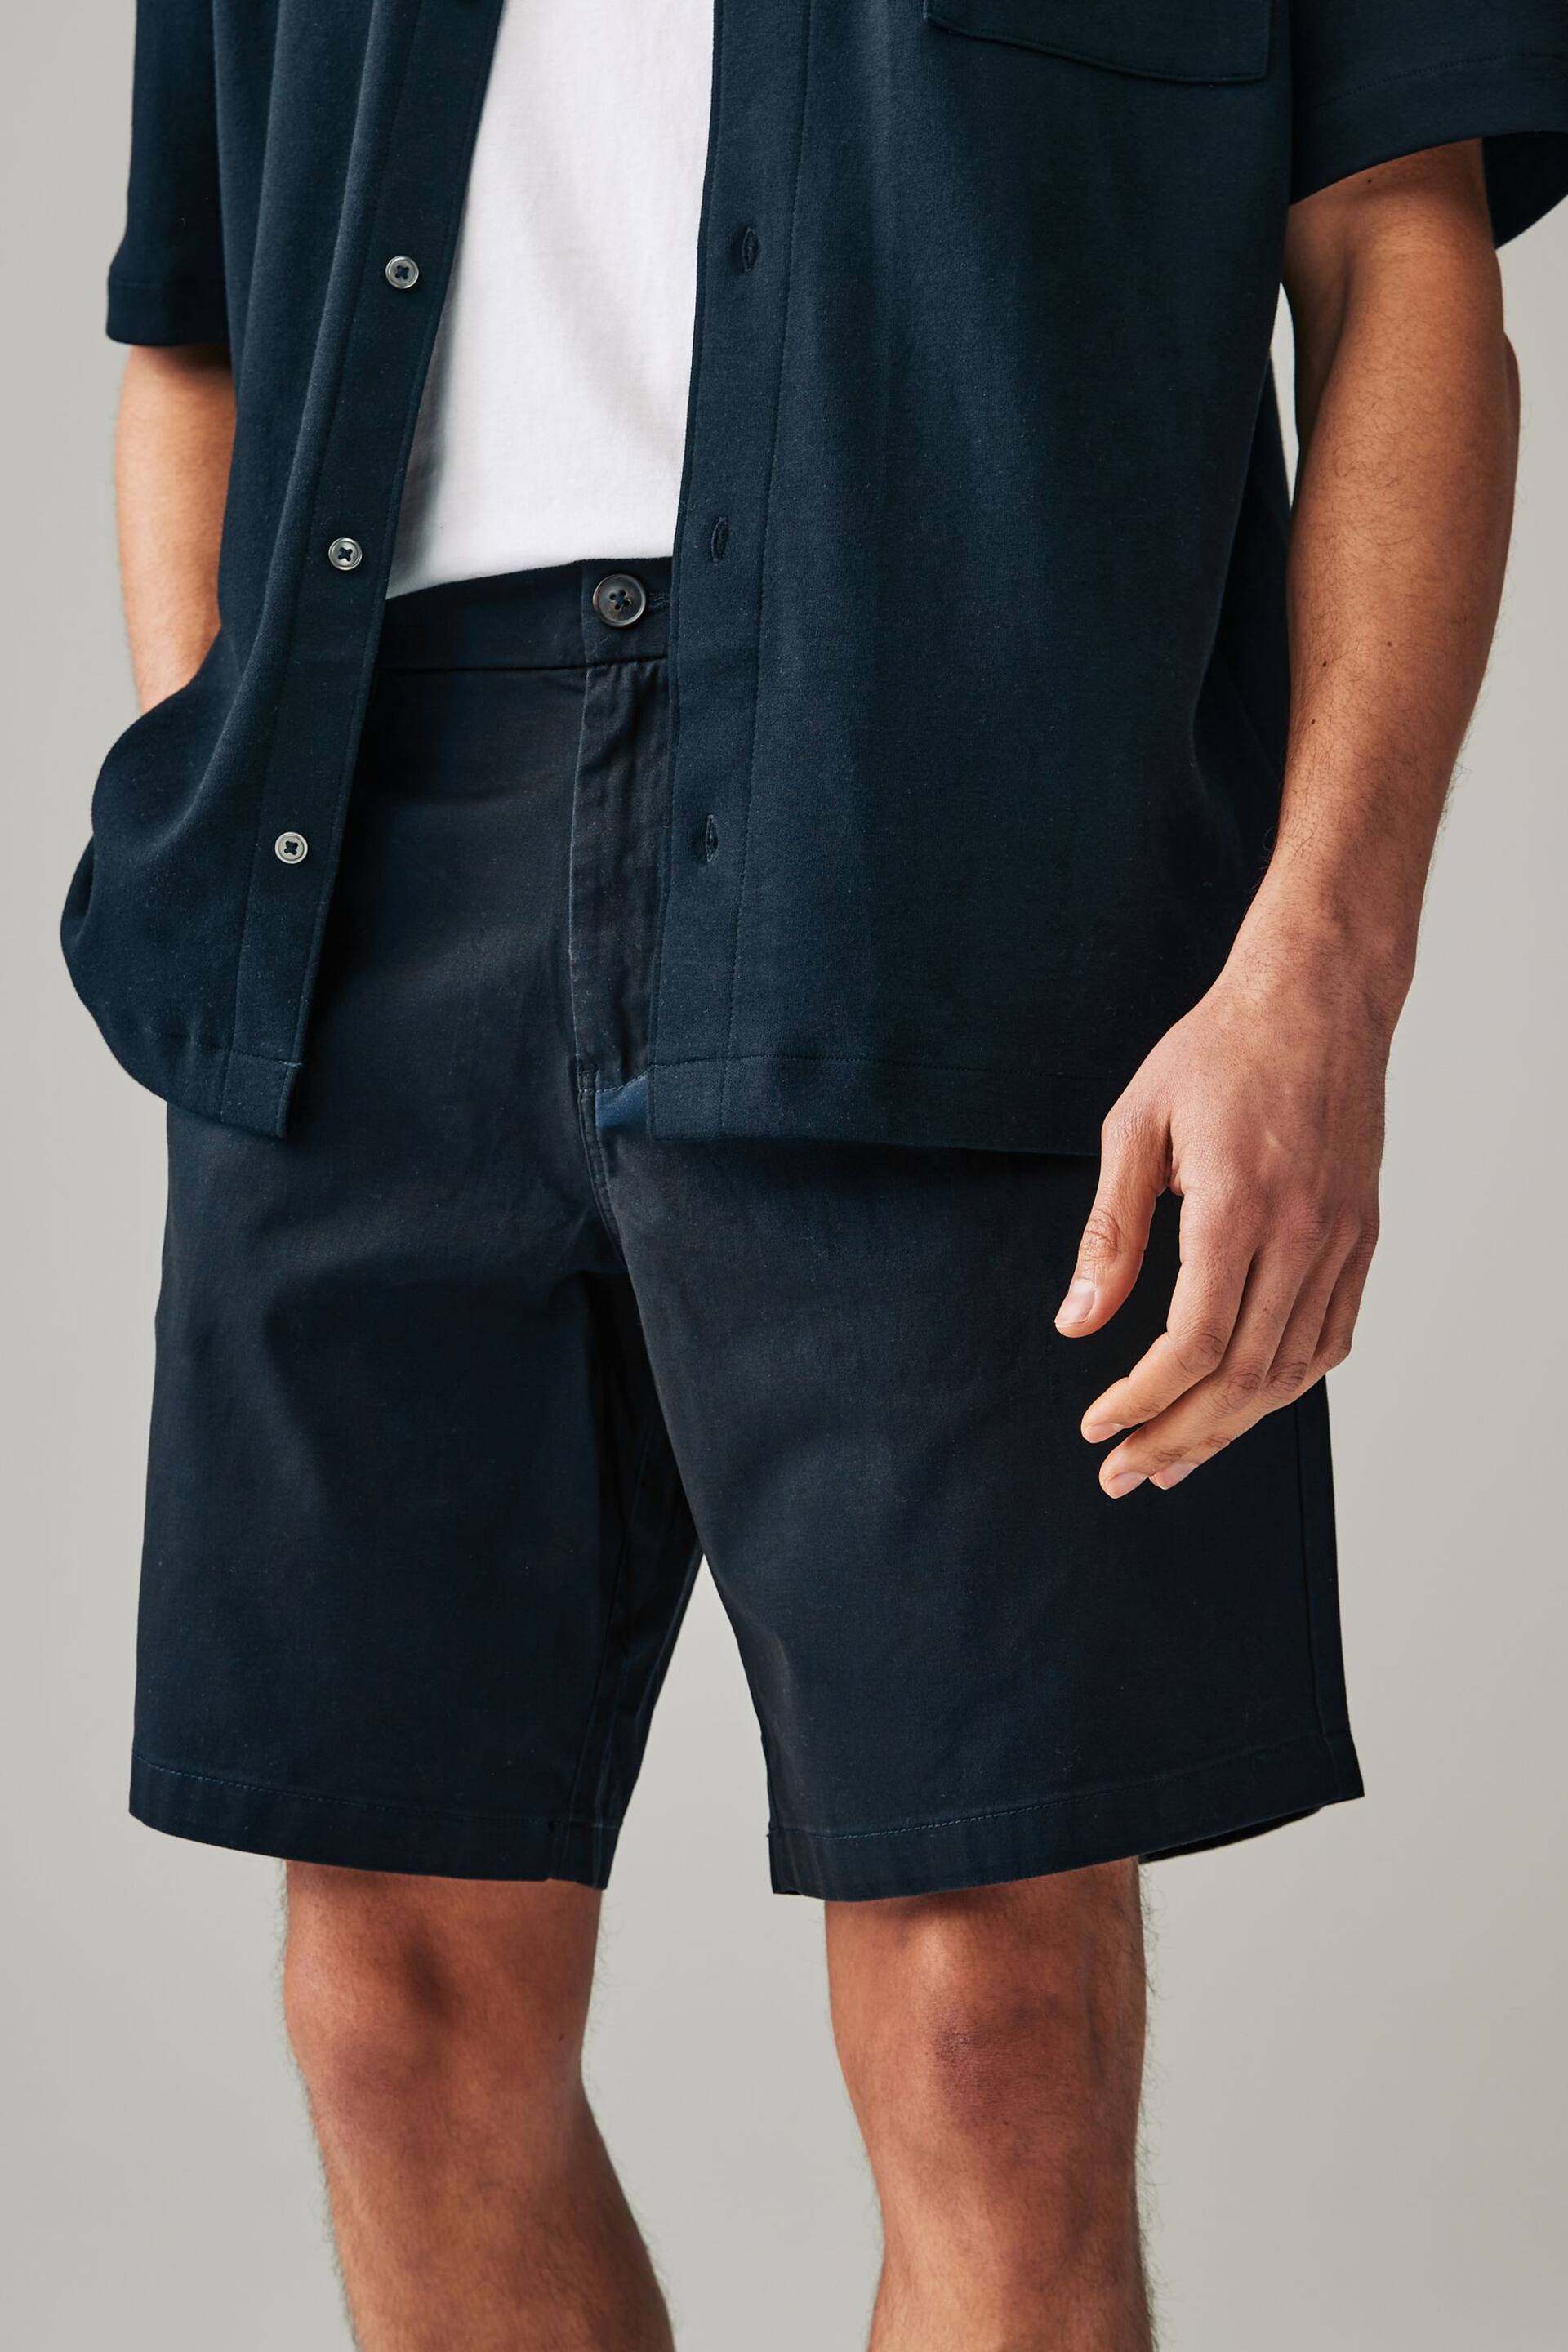 Navy Blue/Grey/Stone Loose Stretch Chinos Shorts 3 Pack - Image 7 of 15